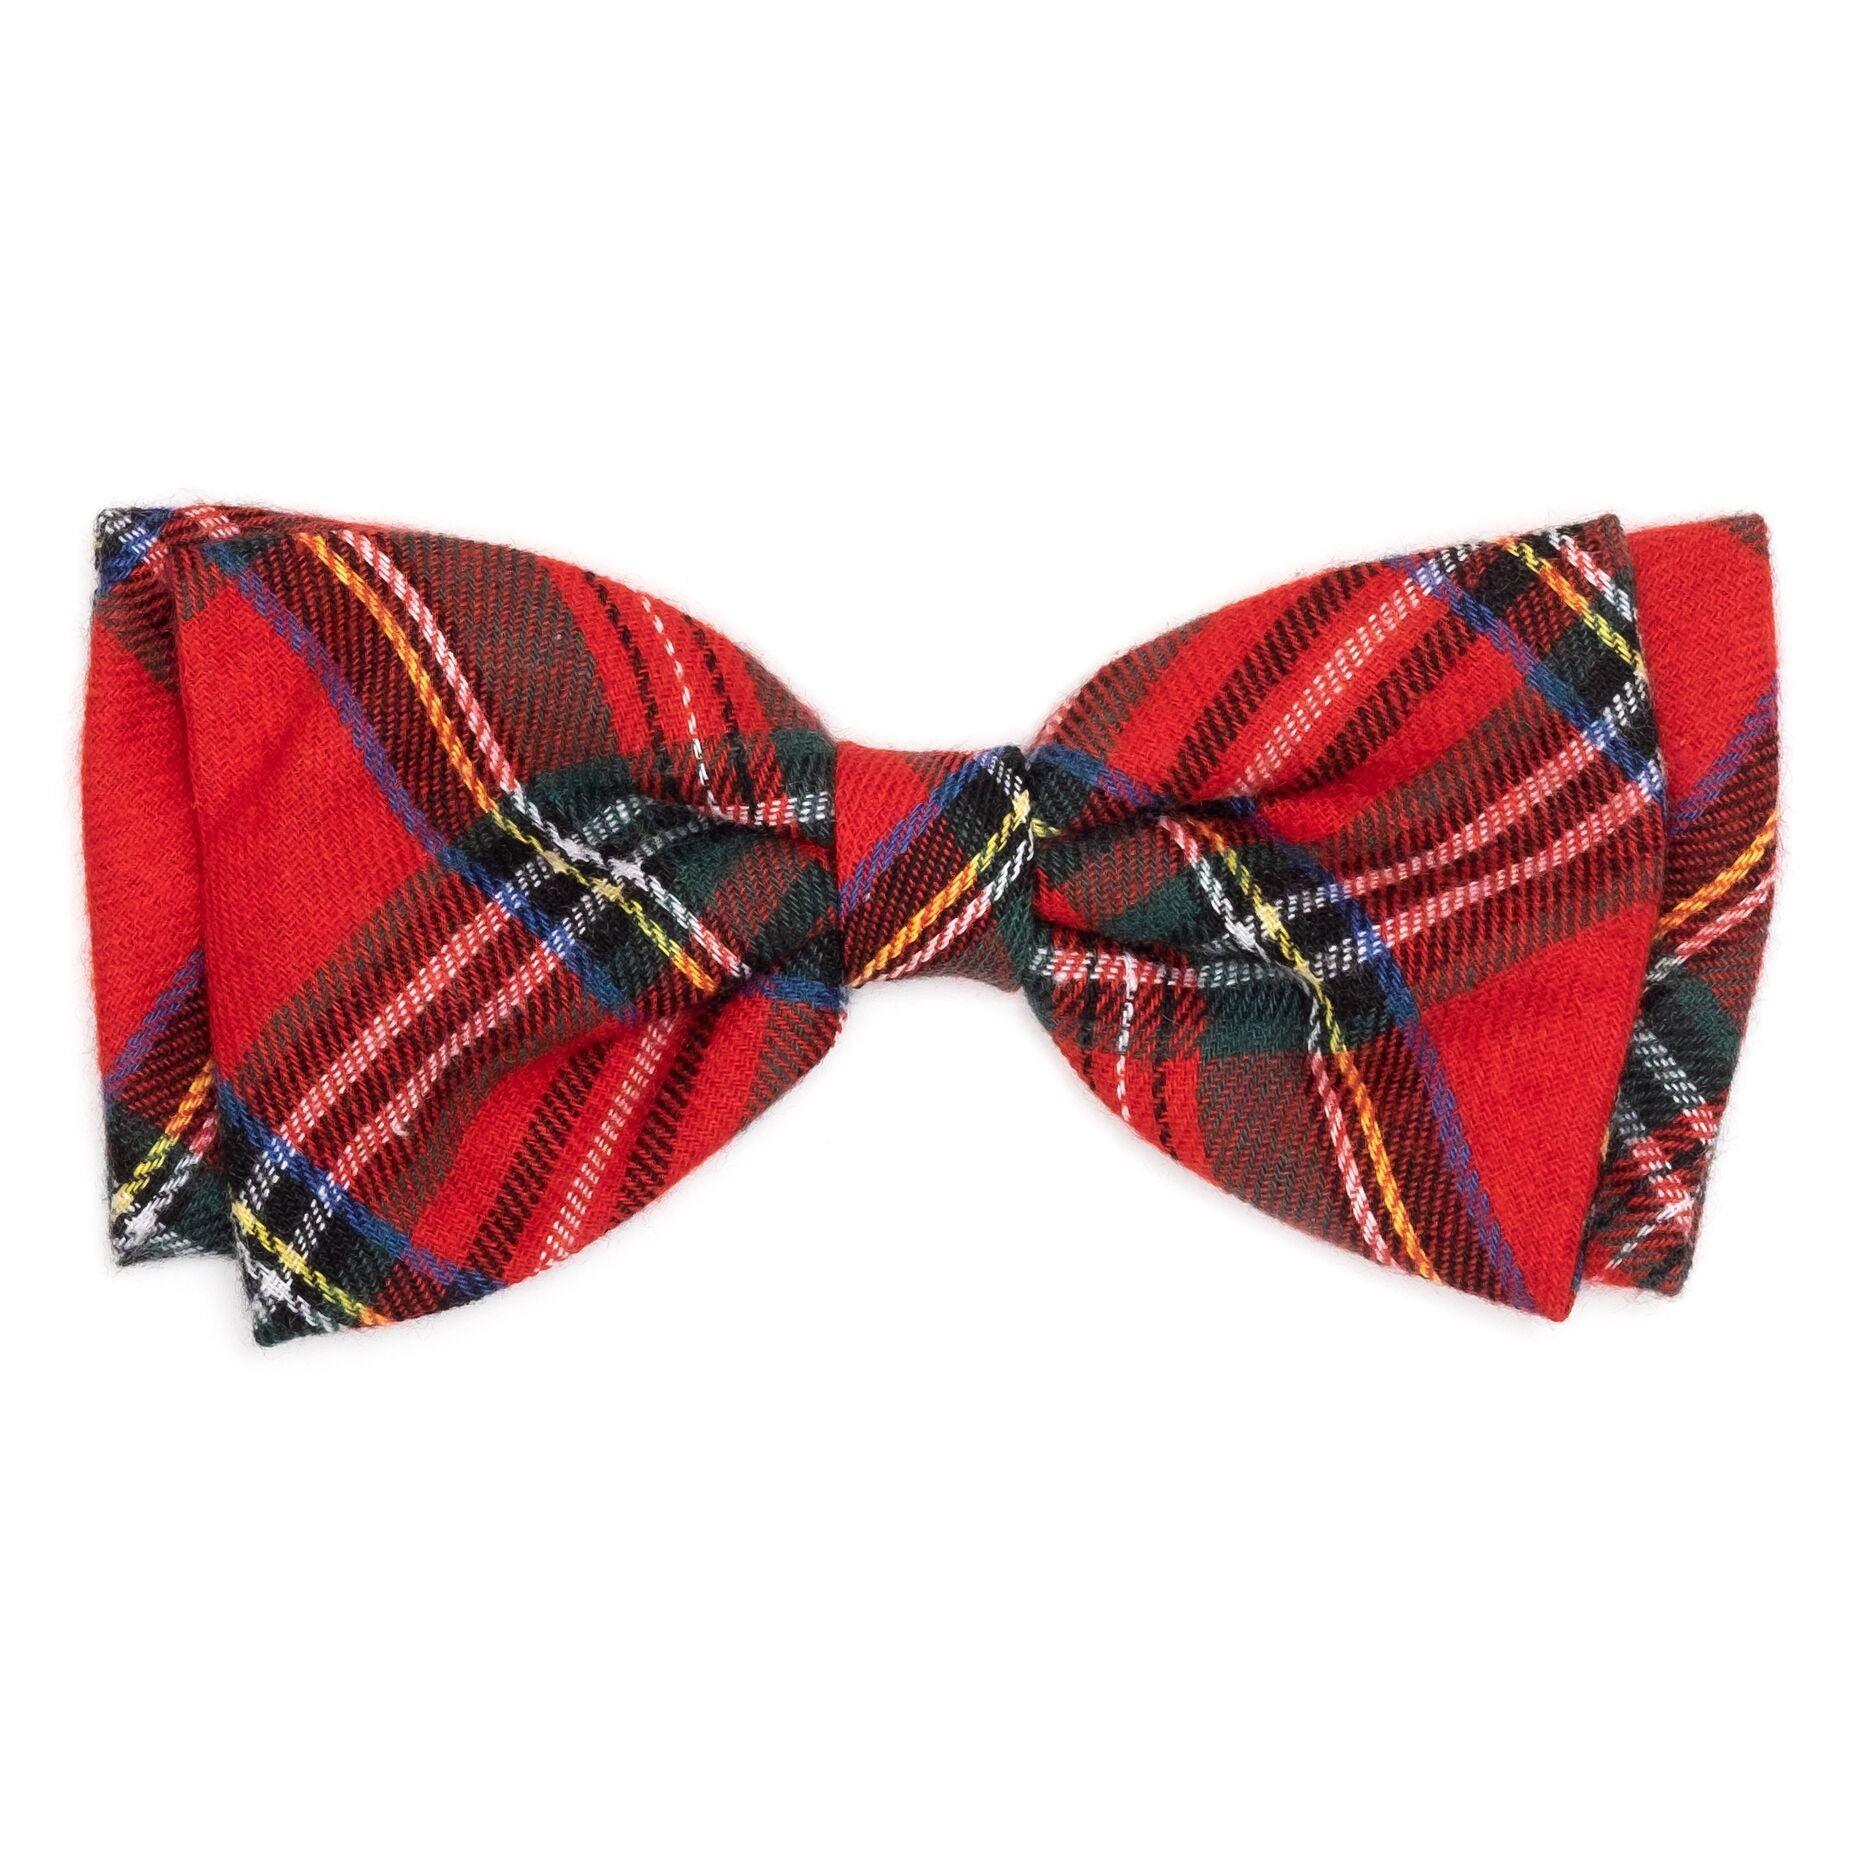 Red Plaid Bow Tie - Rocky & Maggie's Pet Boutique and Salon